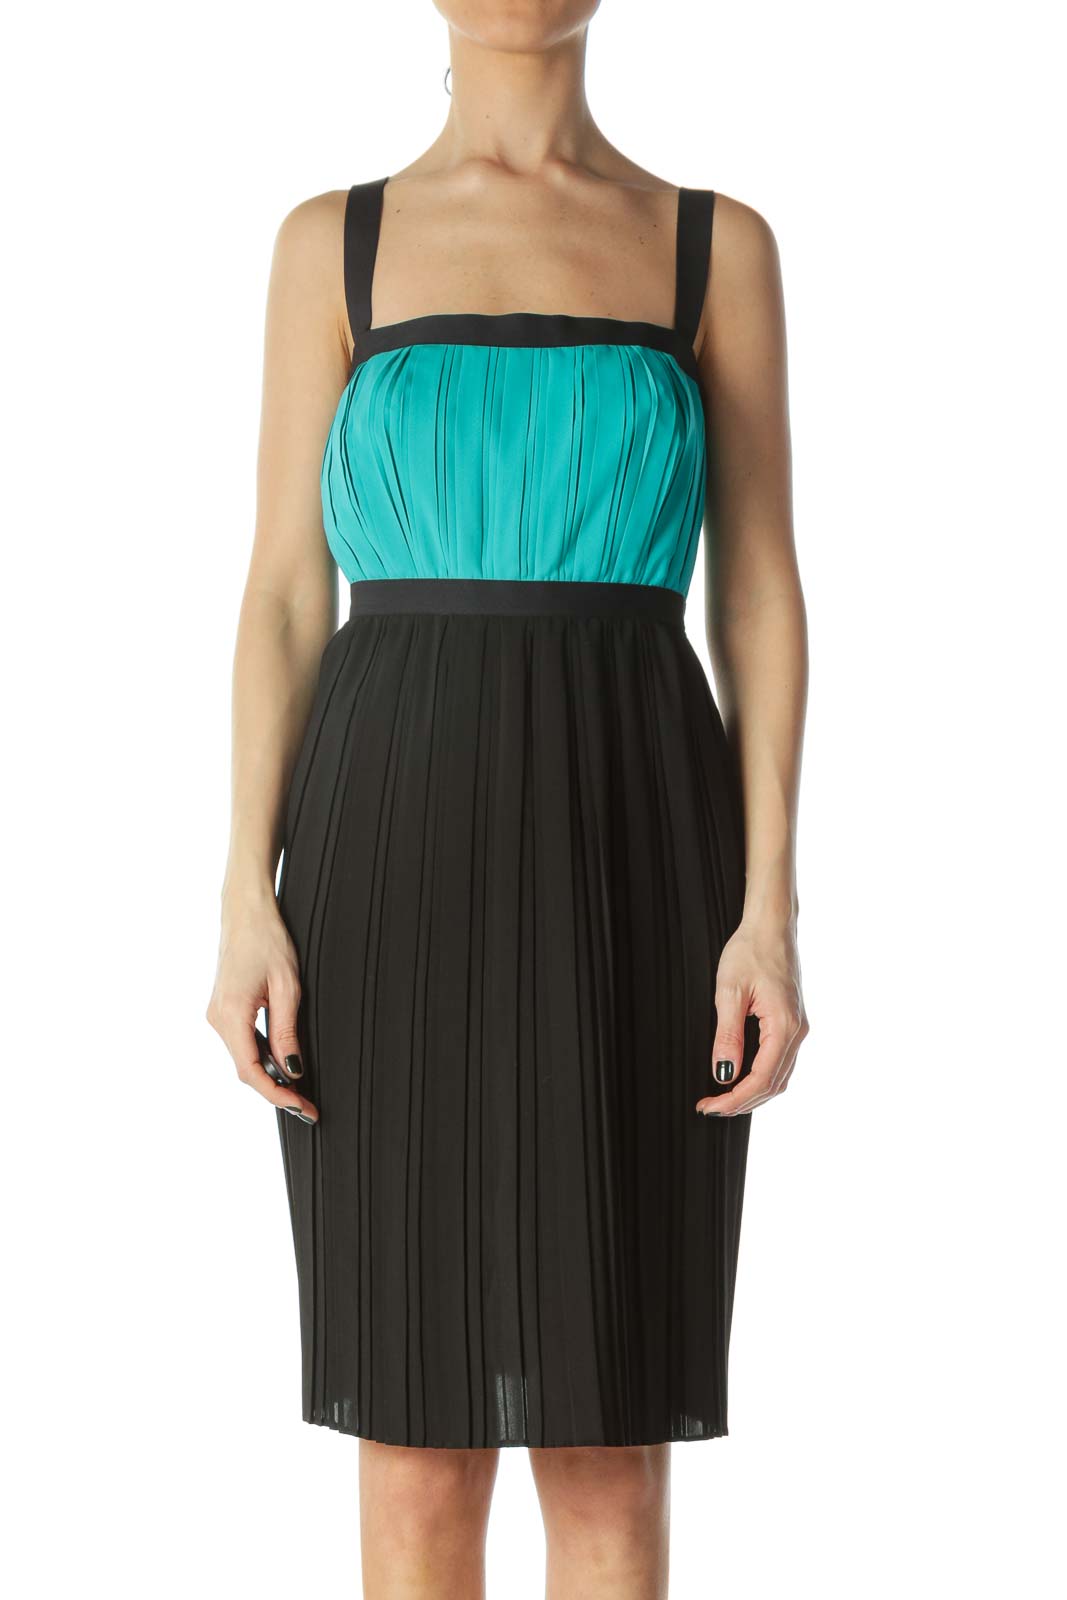 Teal and Black Color Block Dress  Front